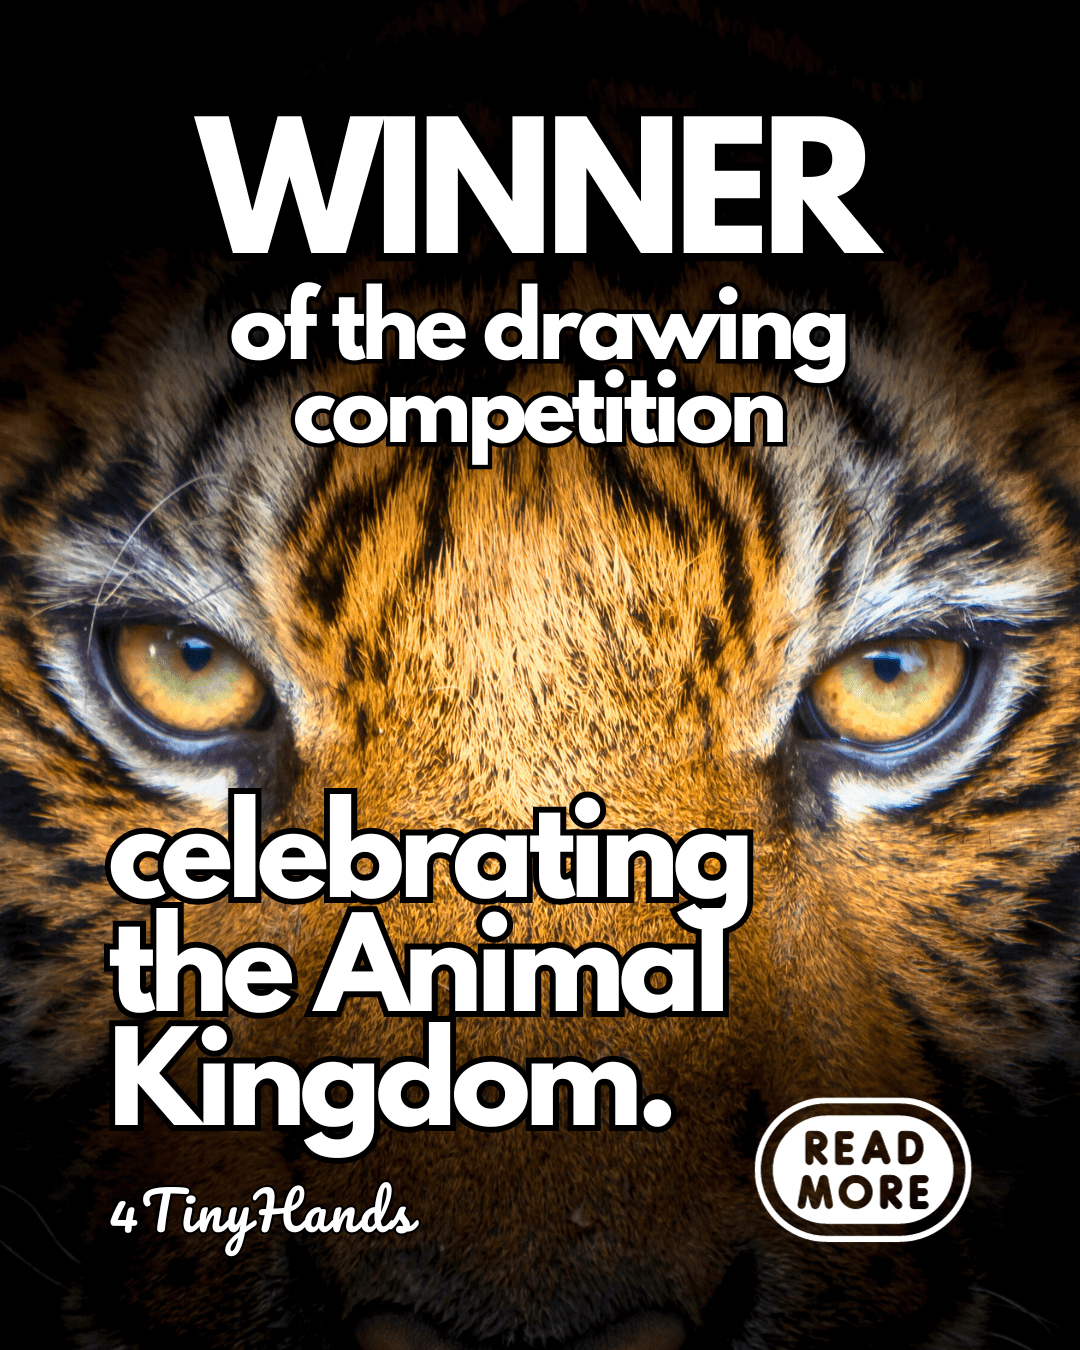 Winner of the “Celebrating the Animal Kingdom” competition